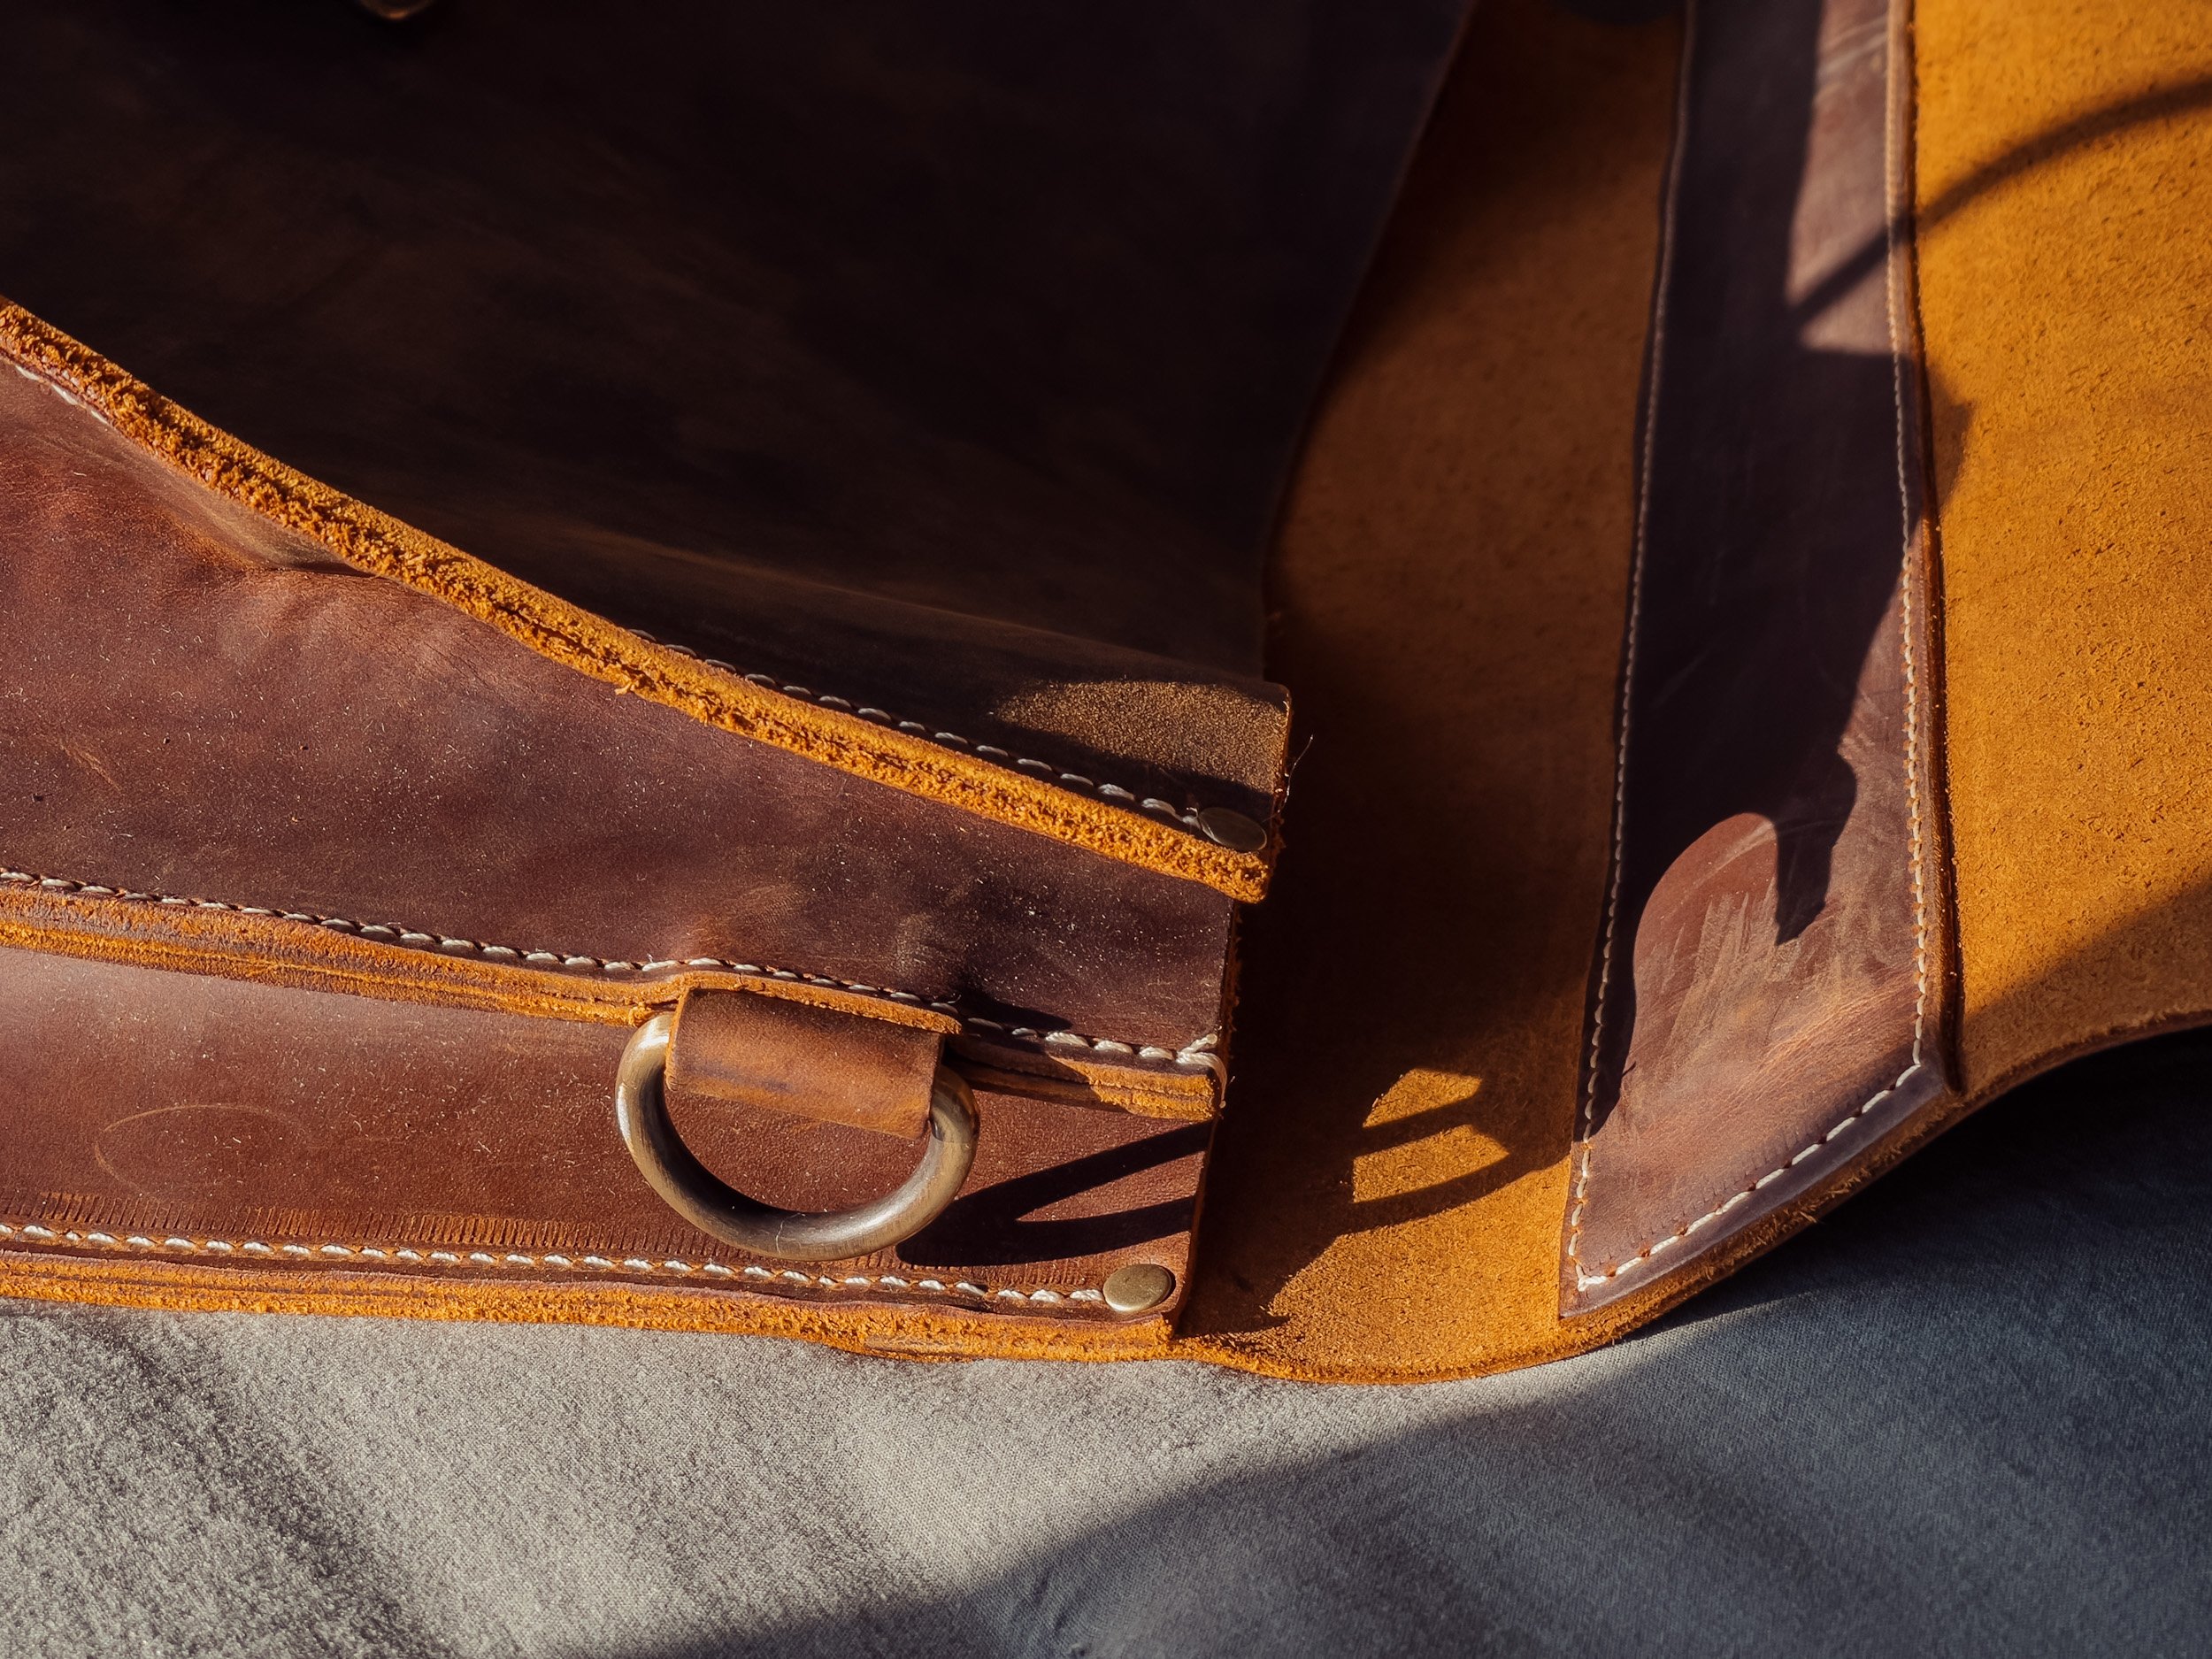 Leather Messenger Bags  Portland Leather Goods